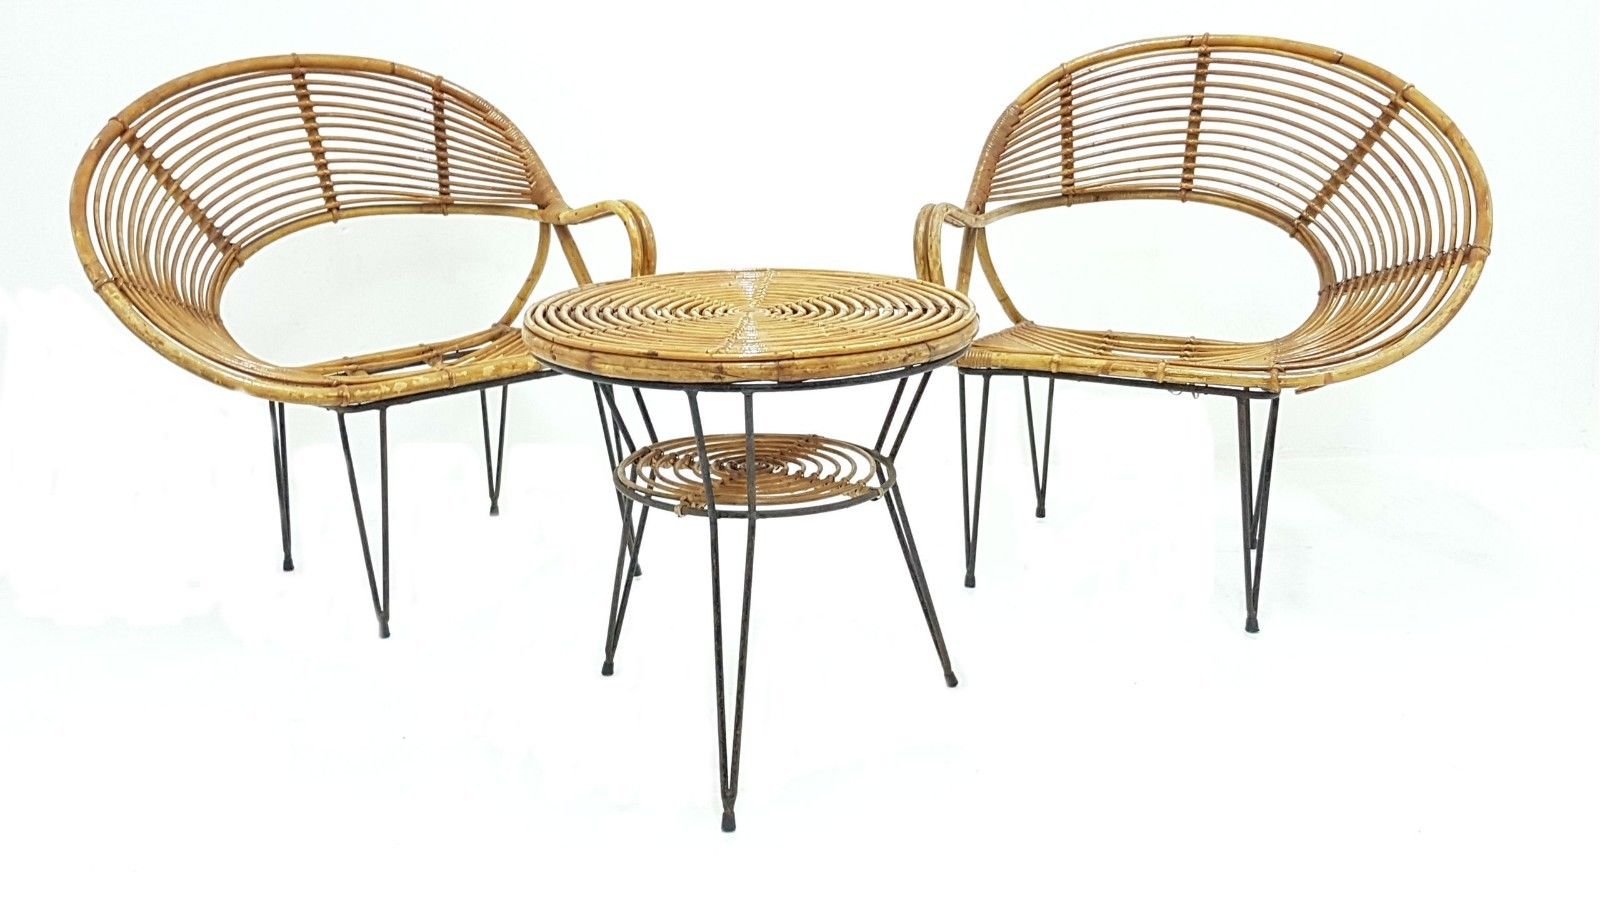 vintage bamboo table 2 chairs set by janine abraham dirk jan rol 1970s FIP-327367